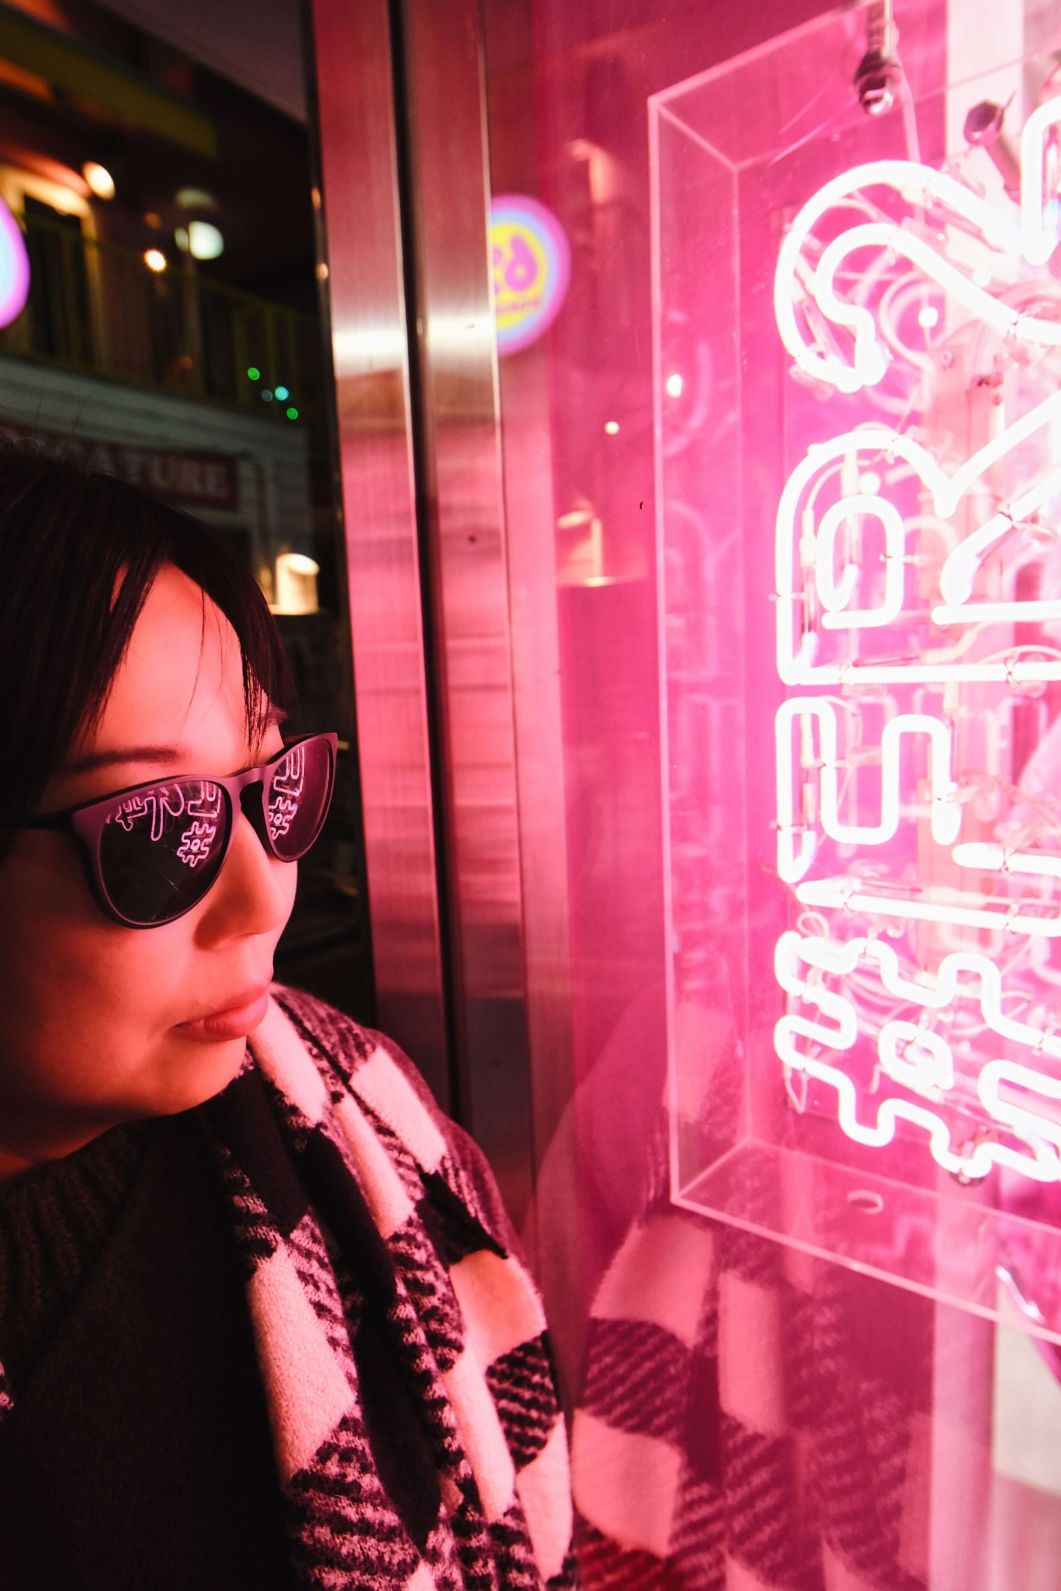 Having the neon lights reflect in the sunglasses is the point in these types of pictures, So you have to remember to focus on that.